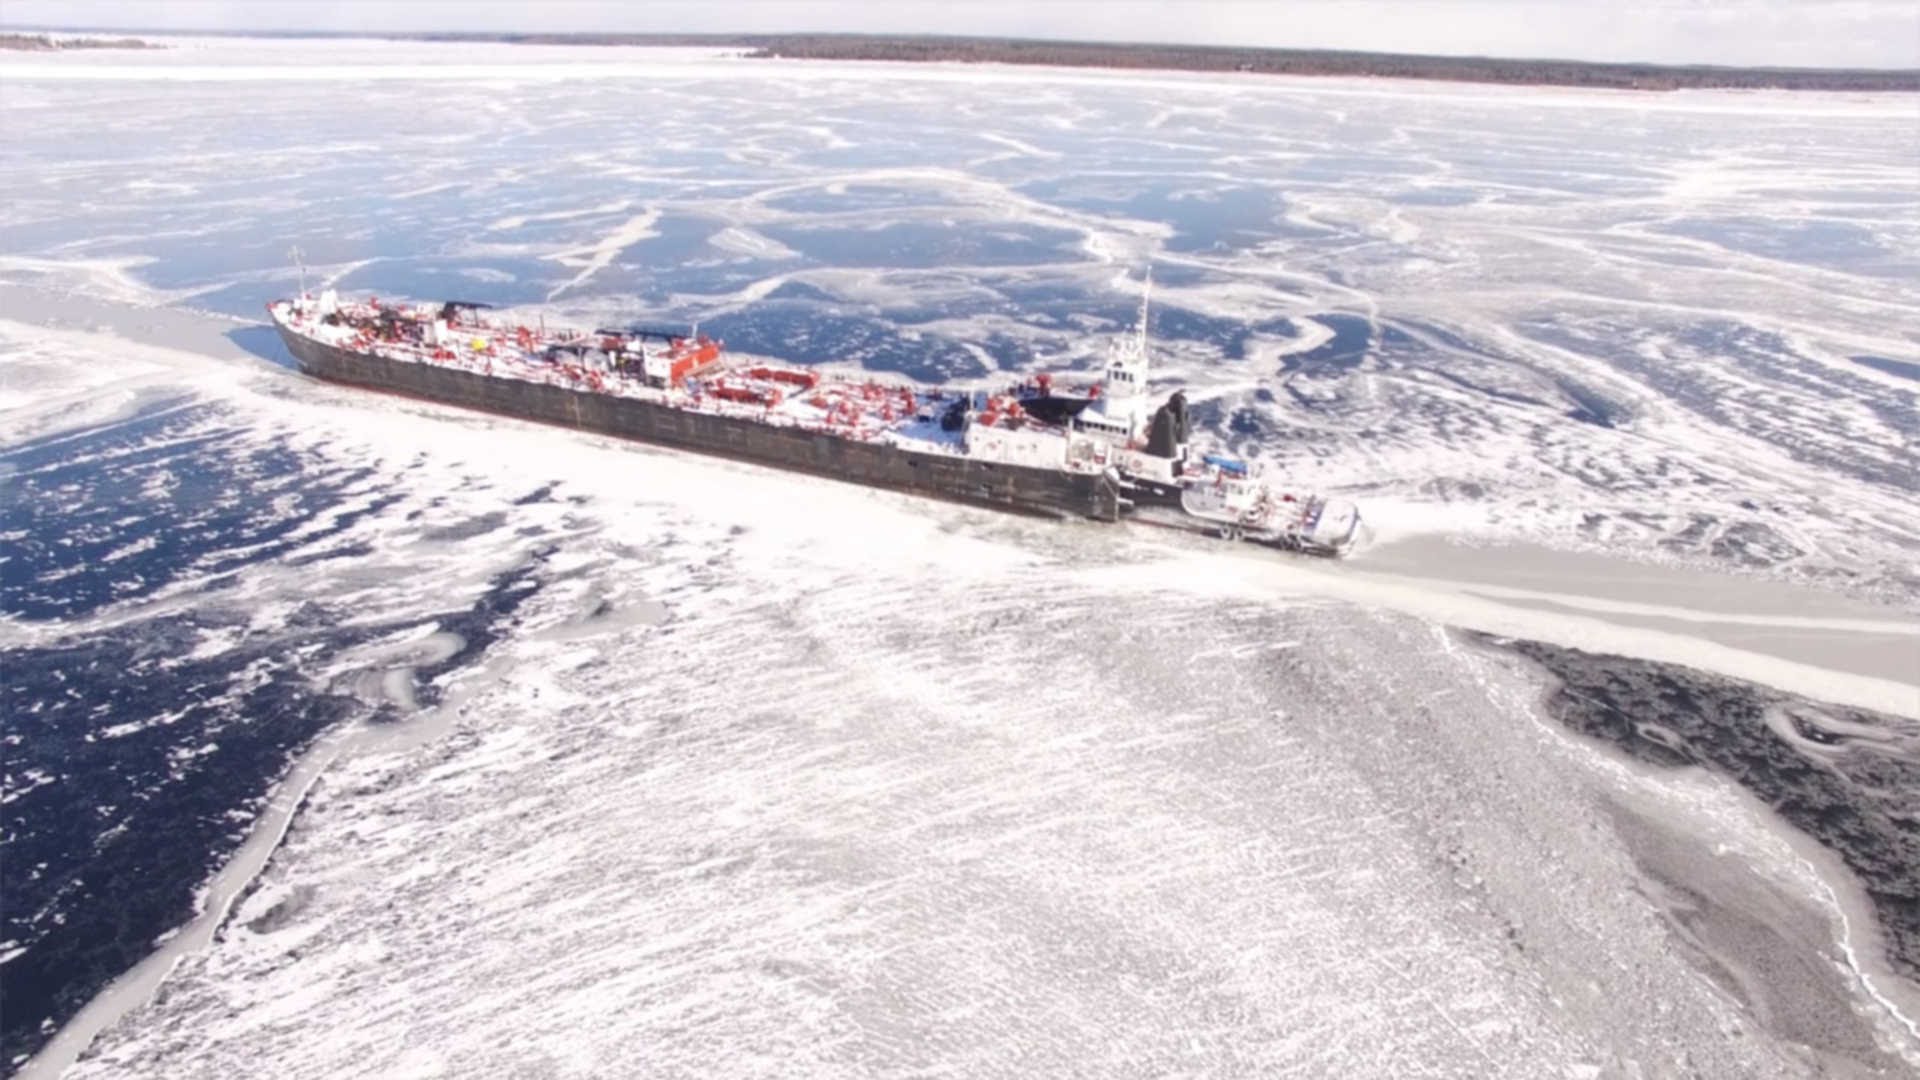 Drone Footage Of Ship Frozen In Ice - YouTube